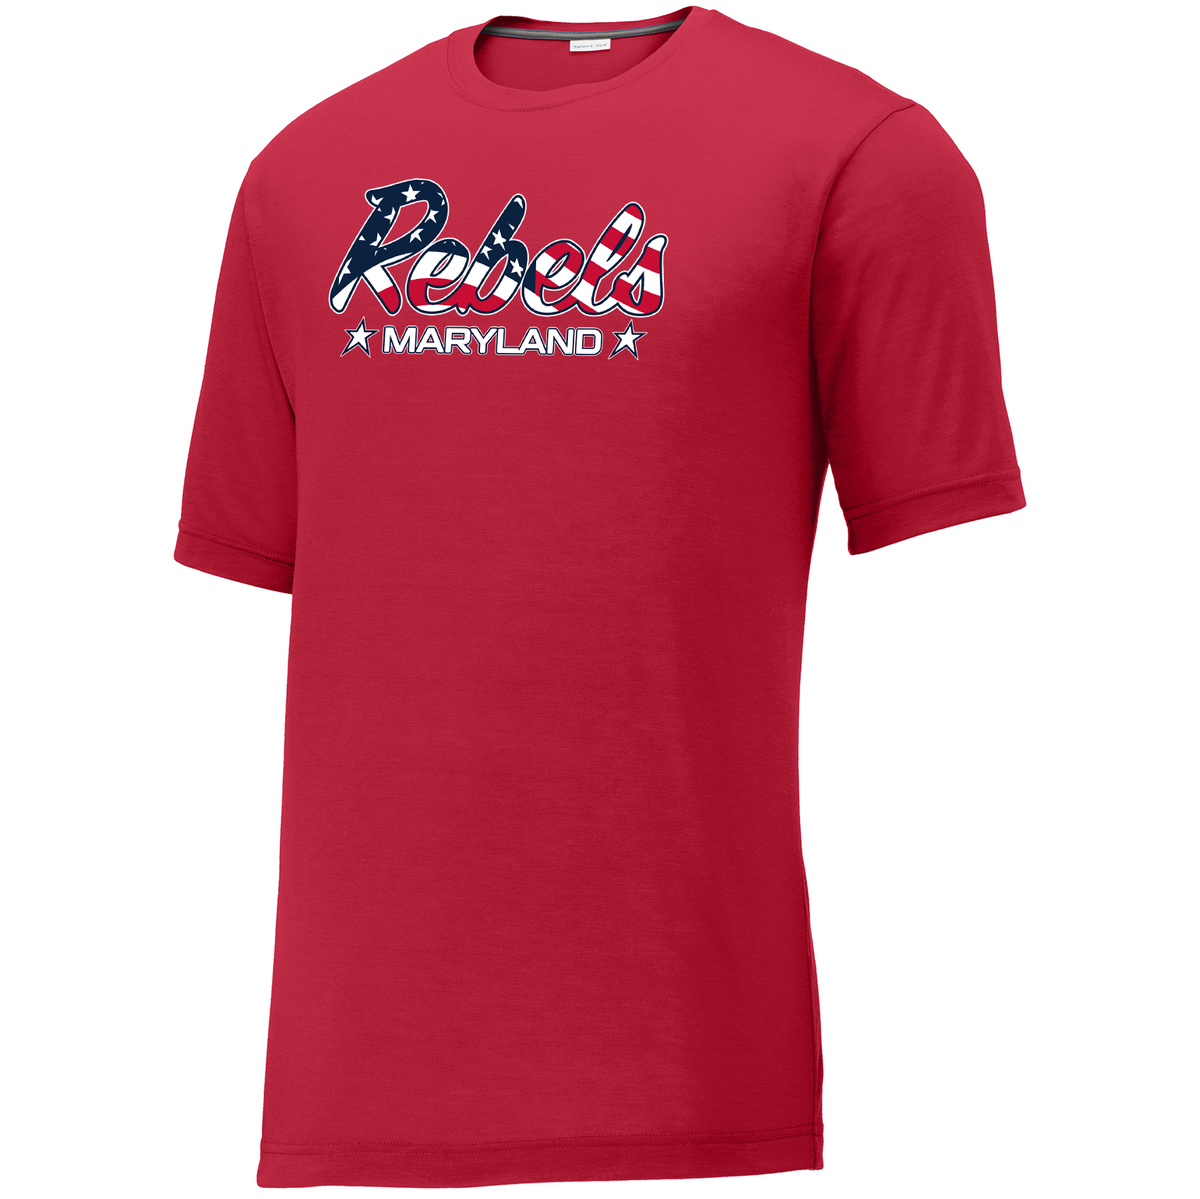 Rebels Maryland CottonTouch Performance T-Shirt